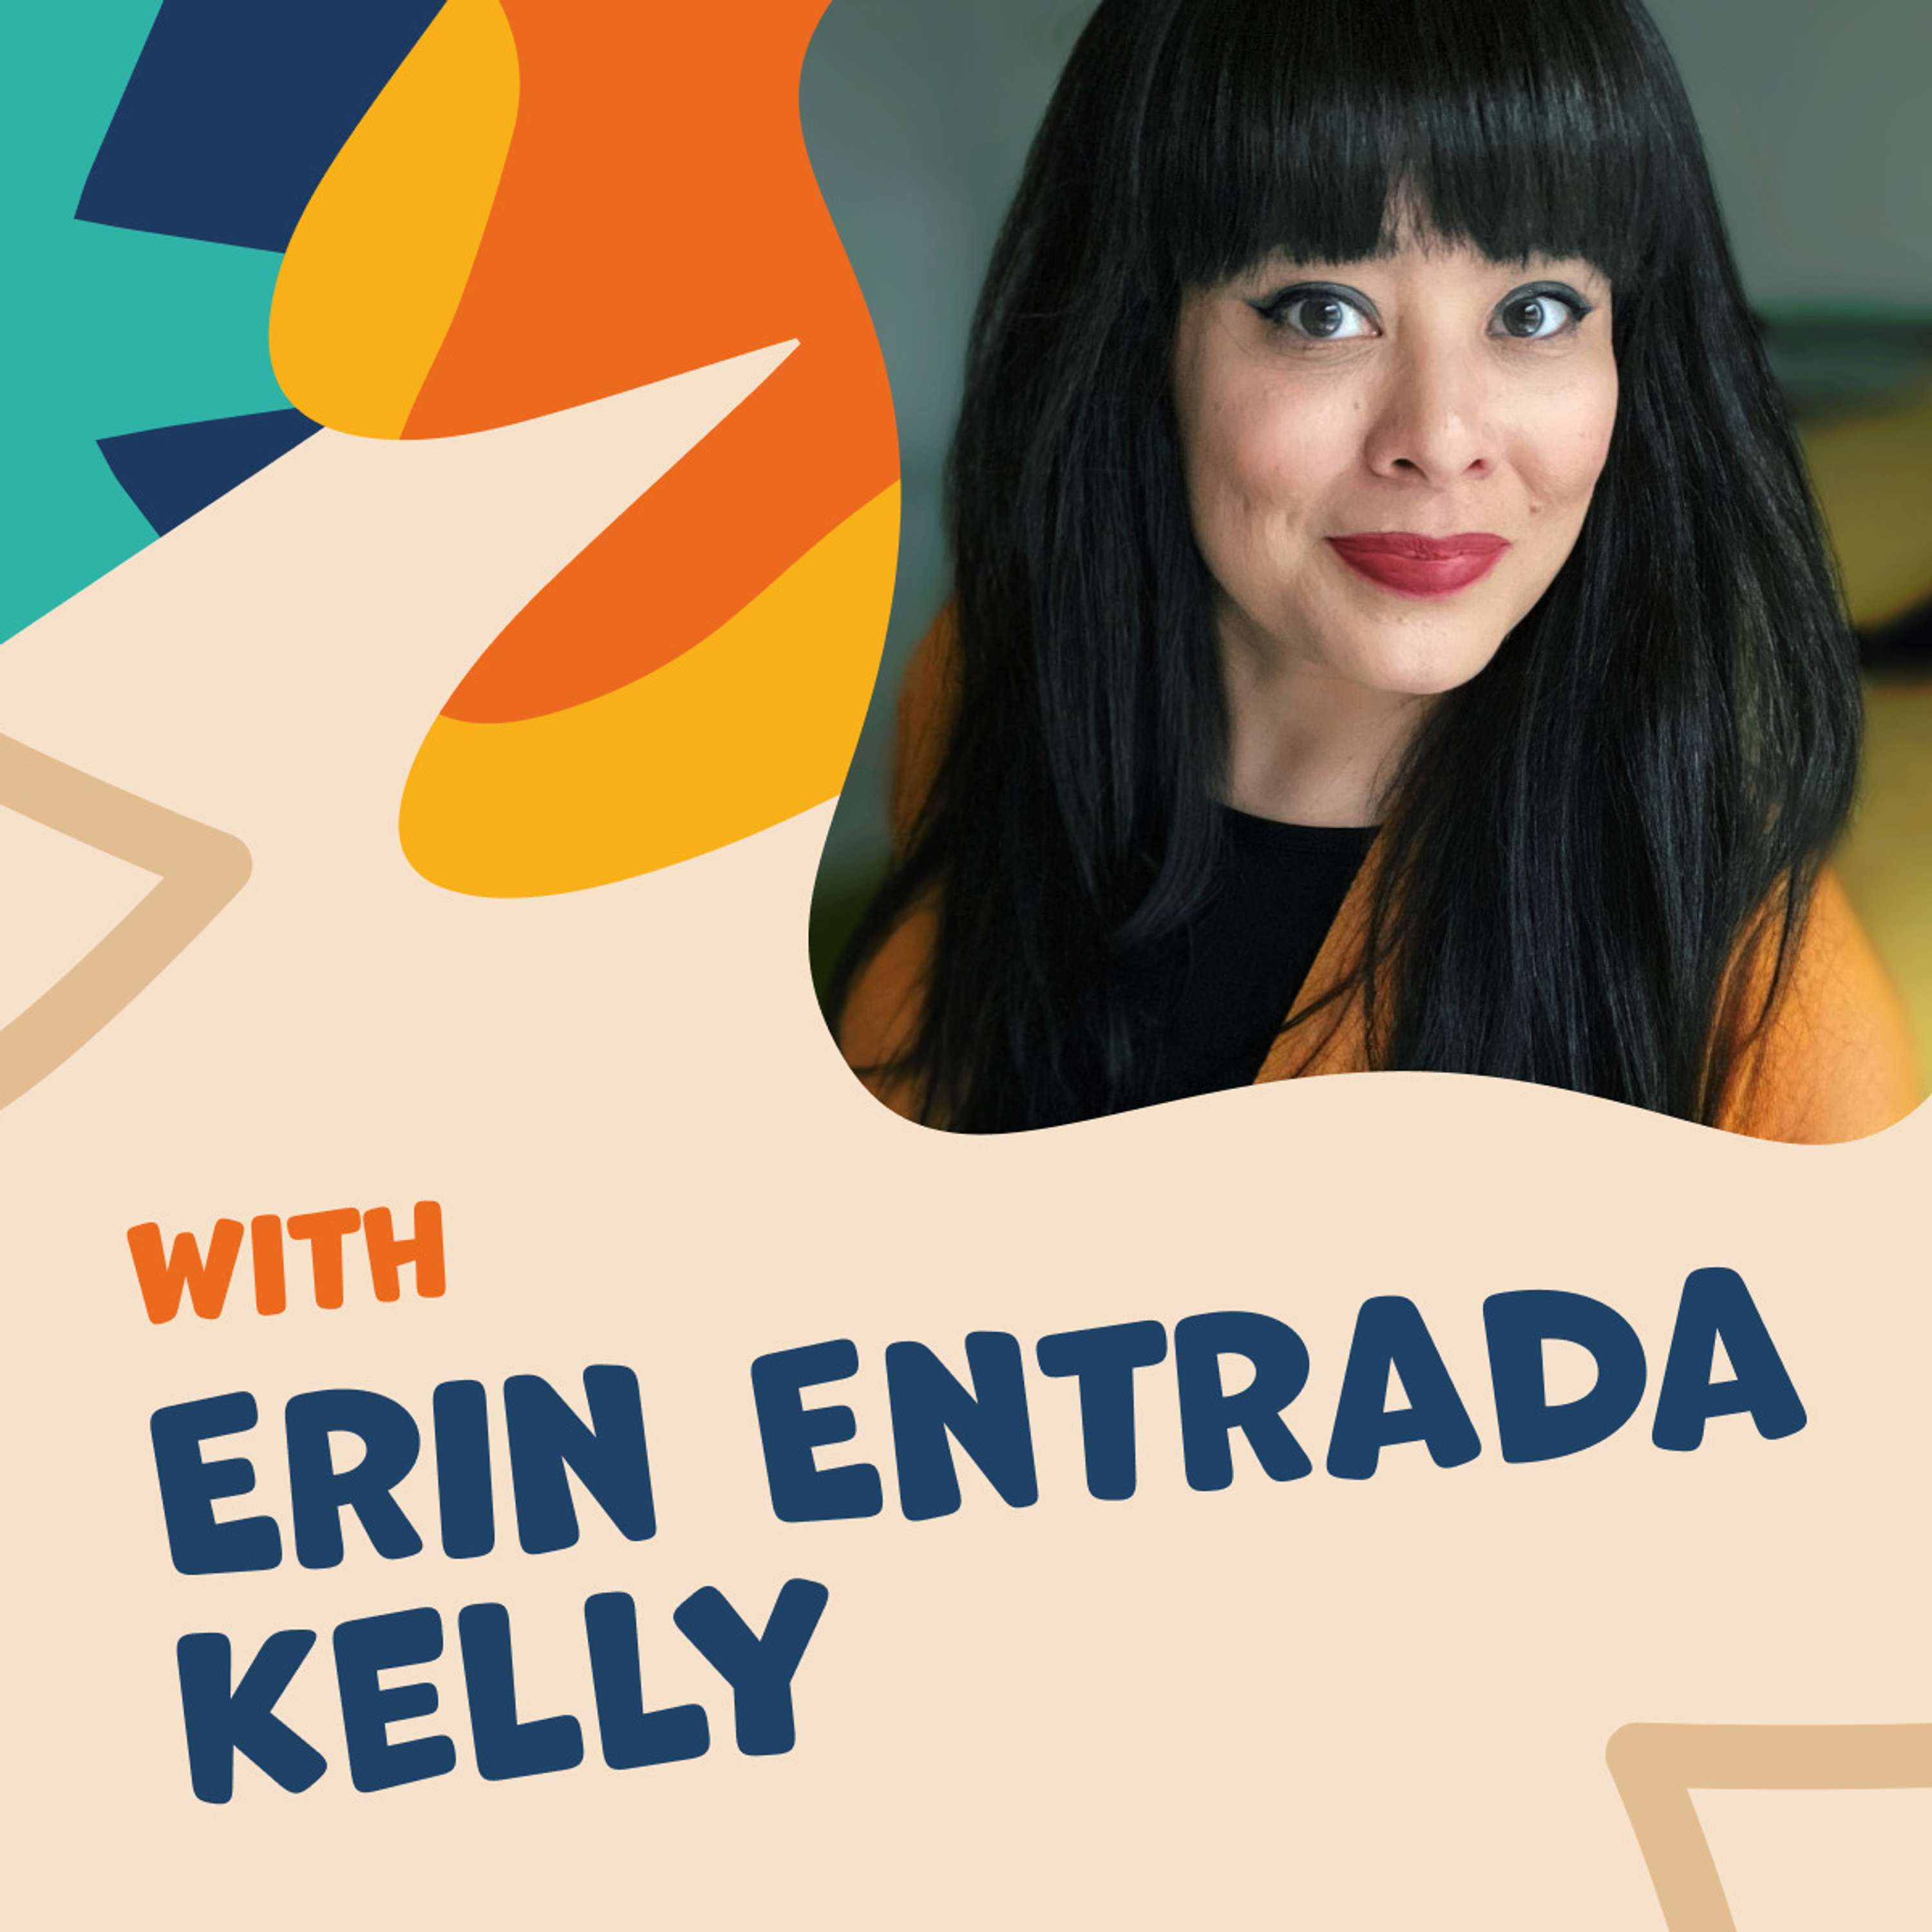 Lonely Planet: Erin Entrada Kelly on Looking After the Overlooked